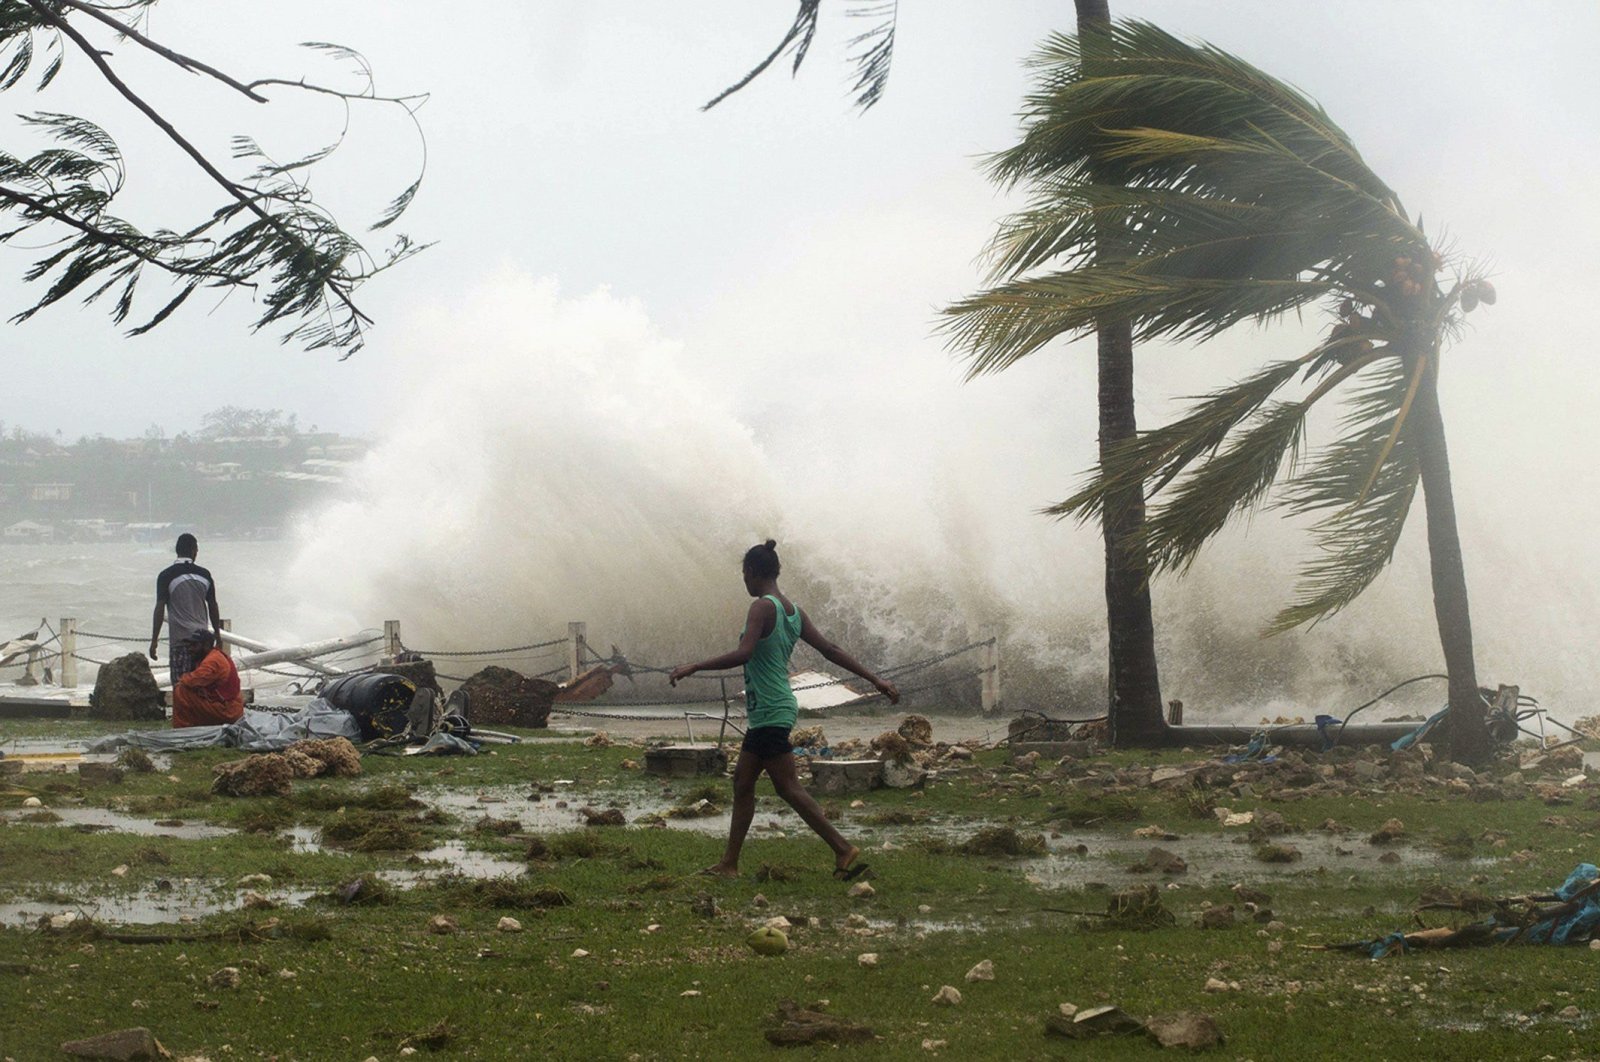 Local residents walk past debris as a wave breaks nearby in Port Vila, the capital city of the Pacific island nation of Vanuatu March 14, 2015. (UNICEF Pacific via Reuters)